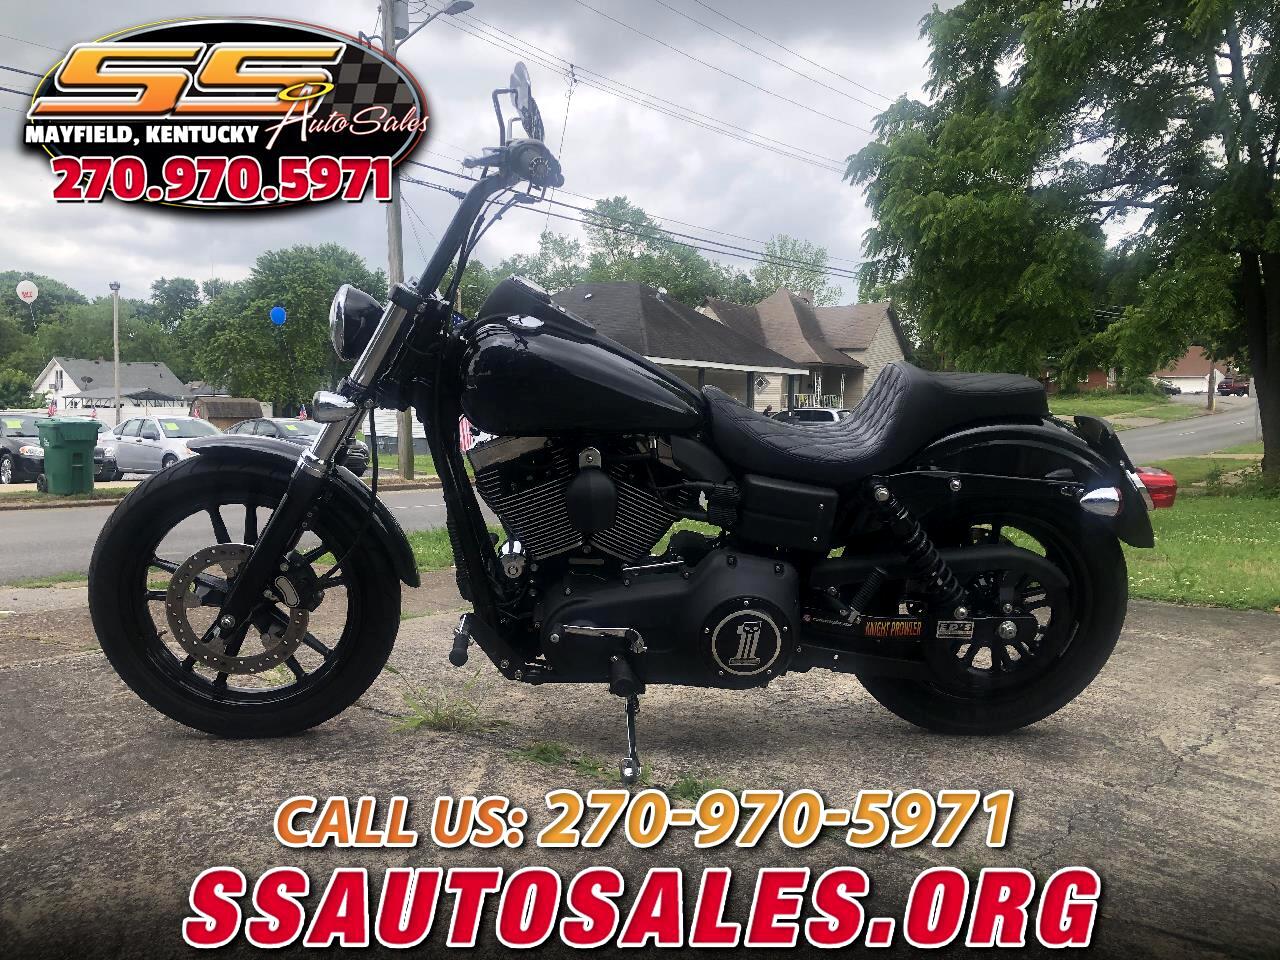 Used 2007 Harley Davidson Street Bob For Sale In Mayfield Ky 42066 Ss Auto Sales Of Mayfield